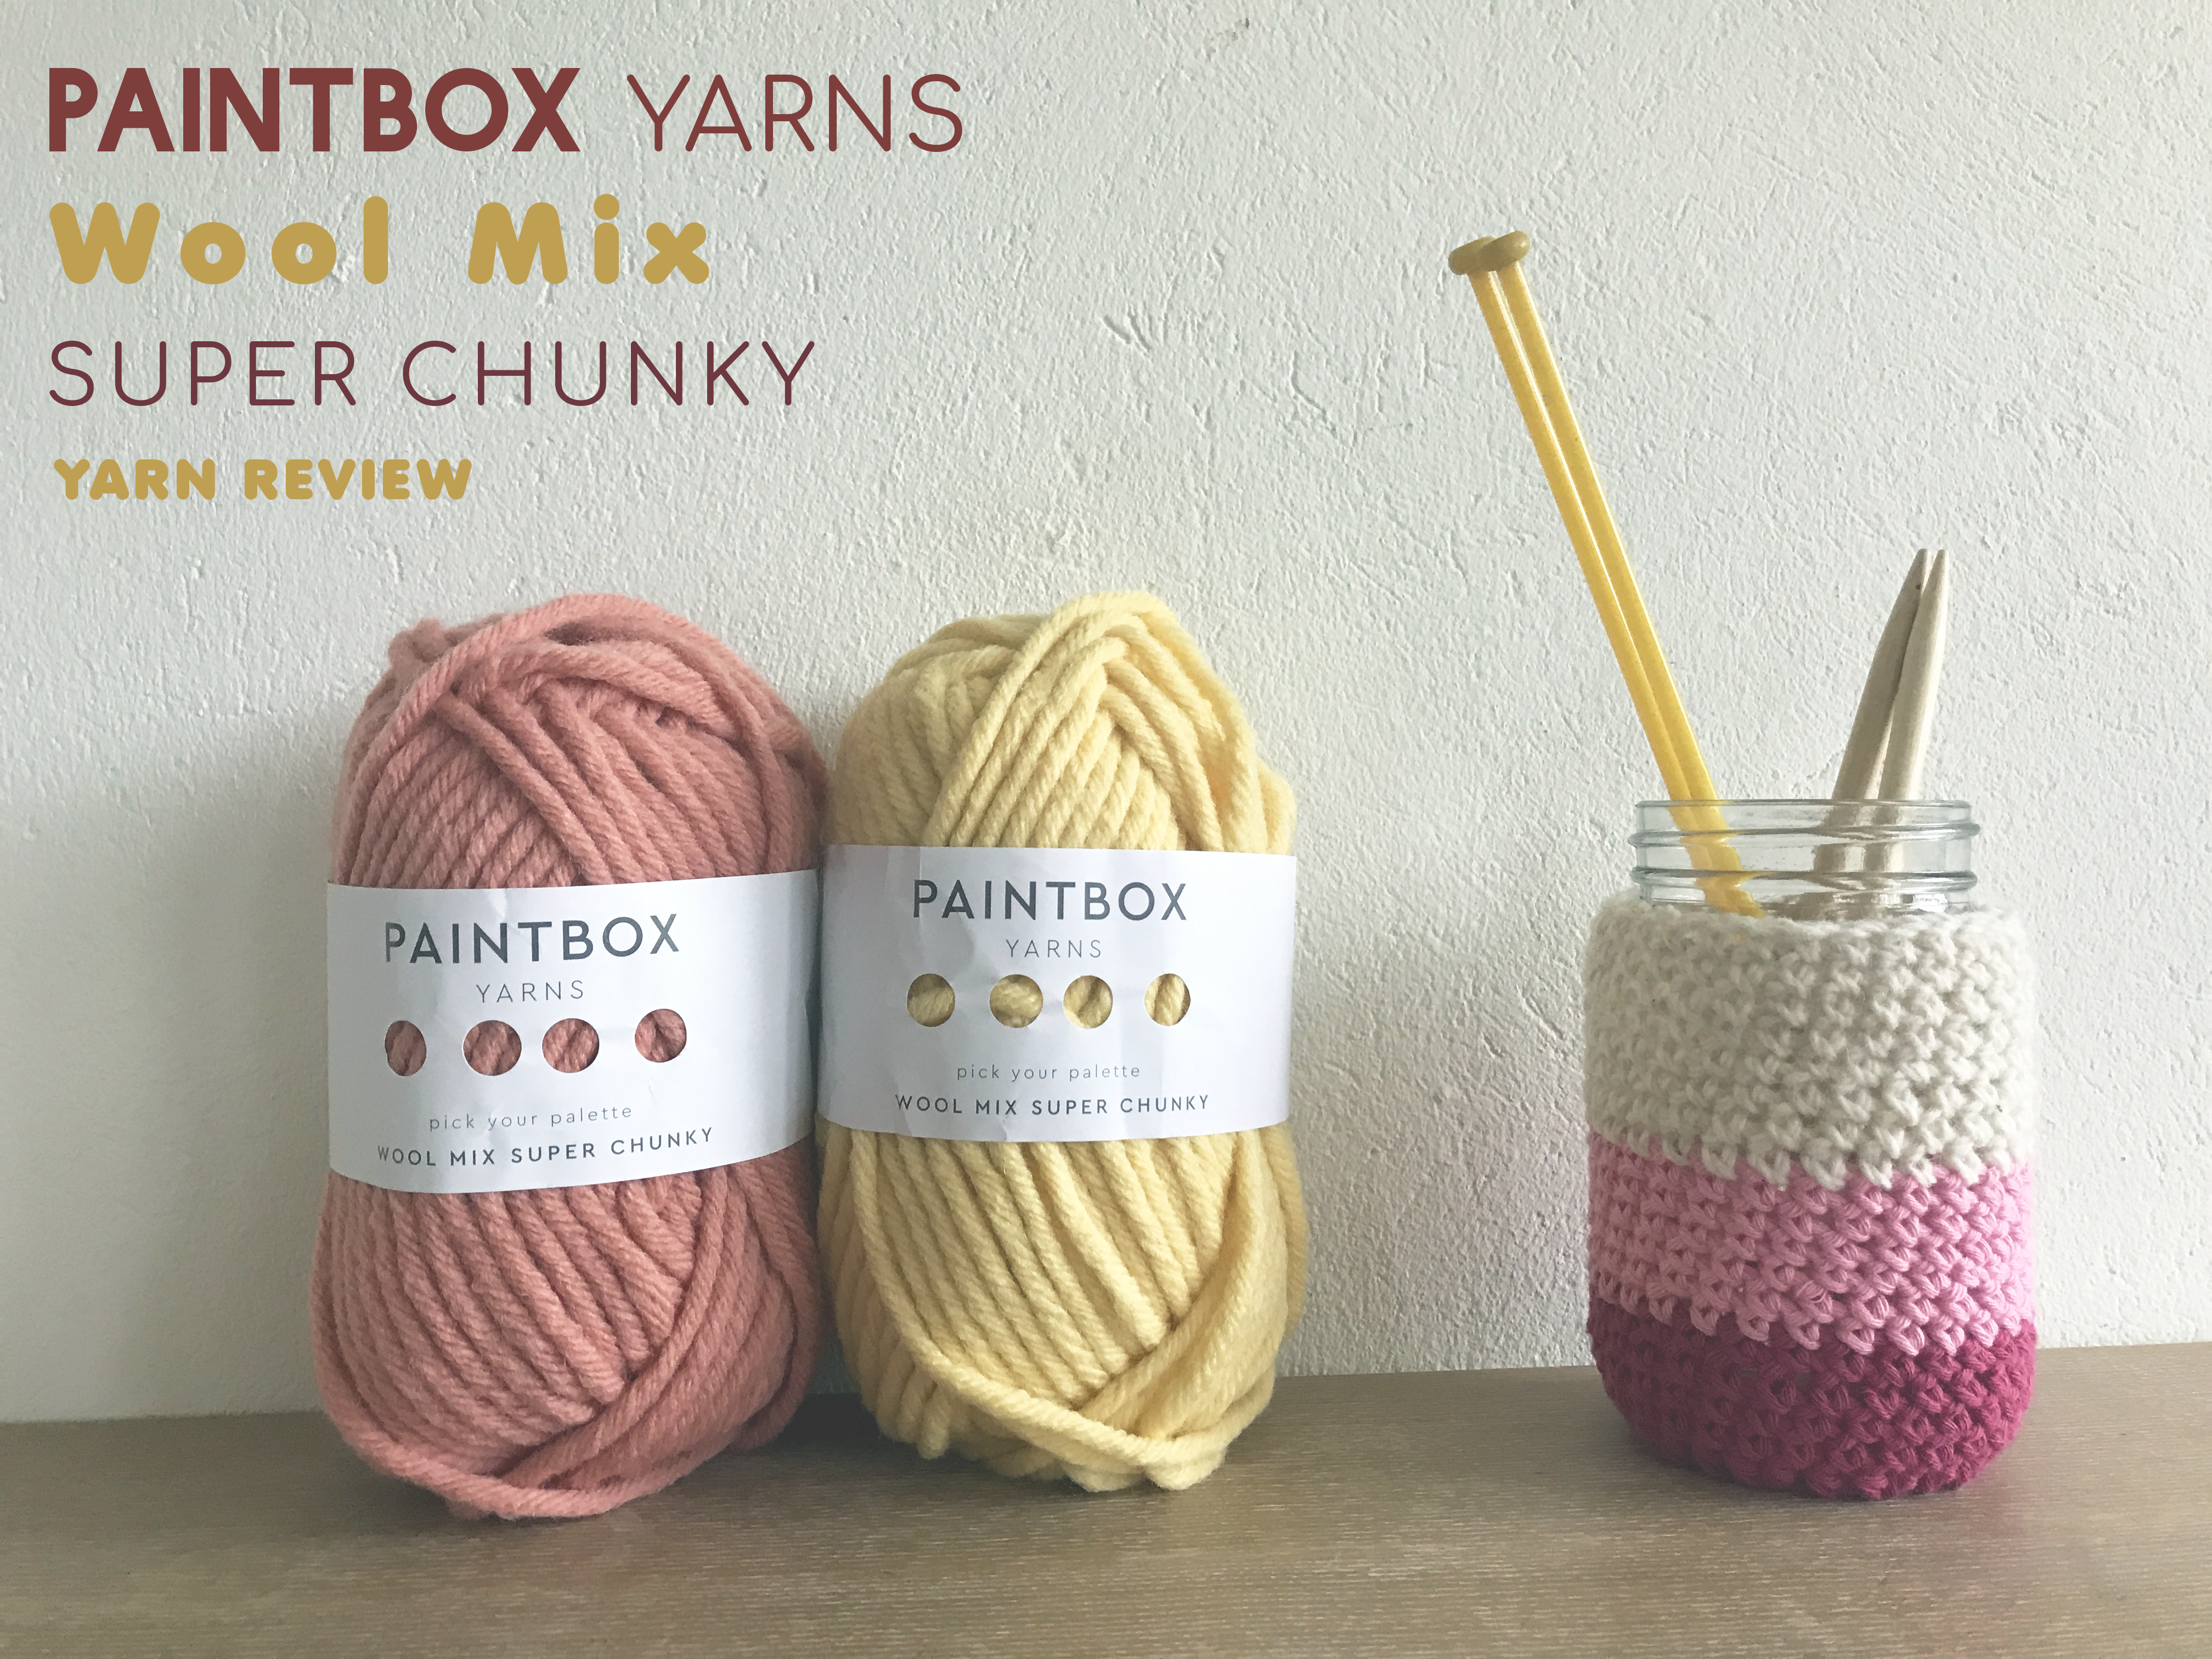 Paintbox Simply Cotton Yarn Review